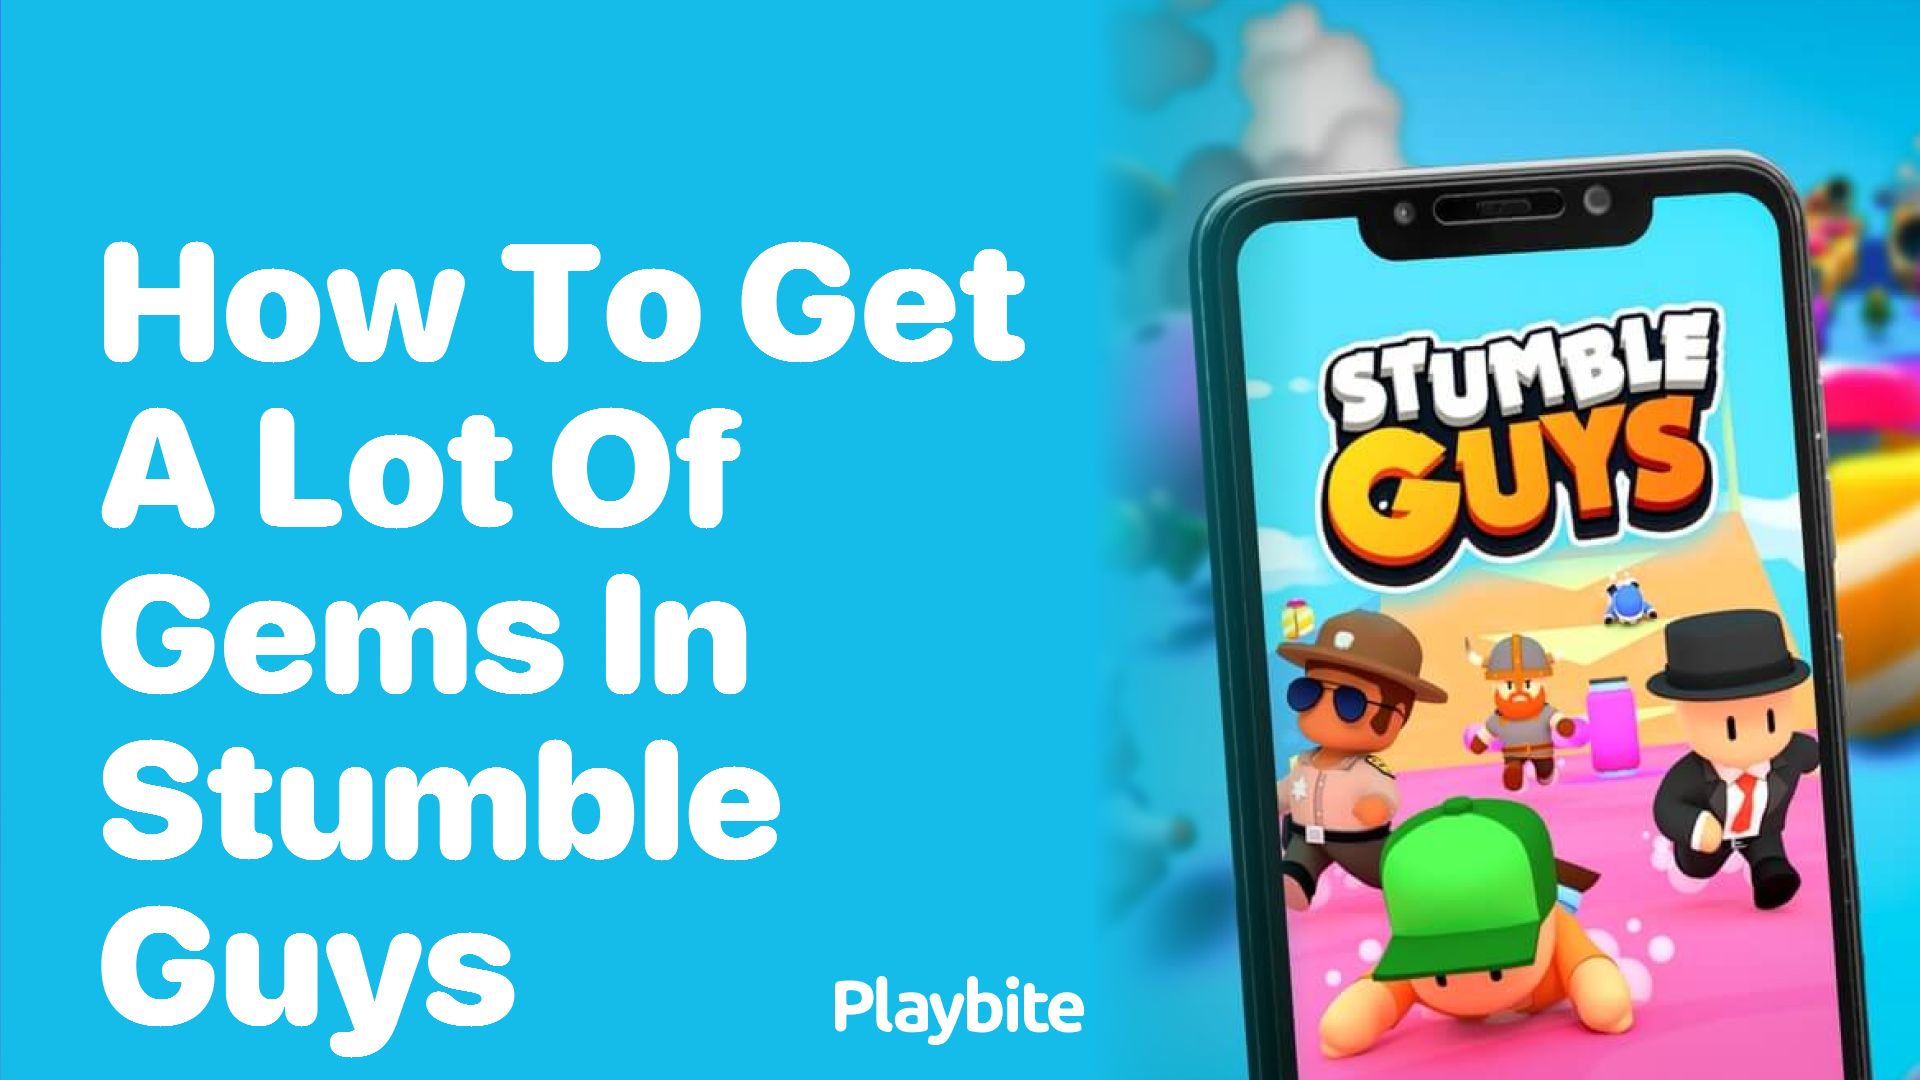 How to Get a Lot of Gems in Stumble Guys